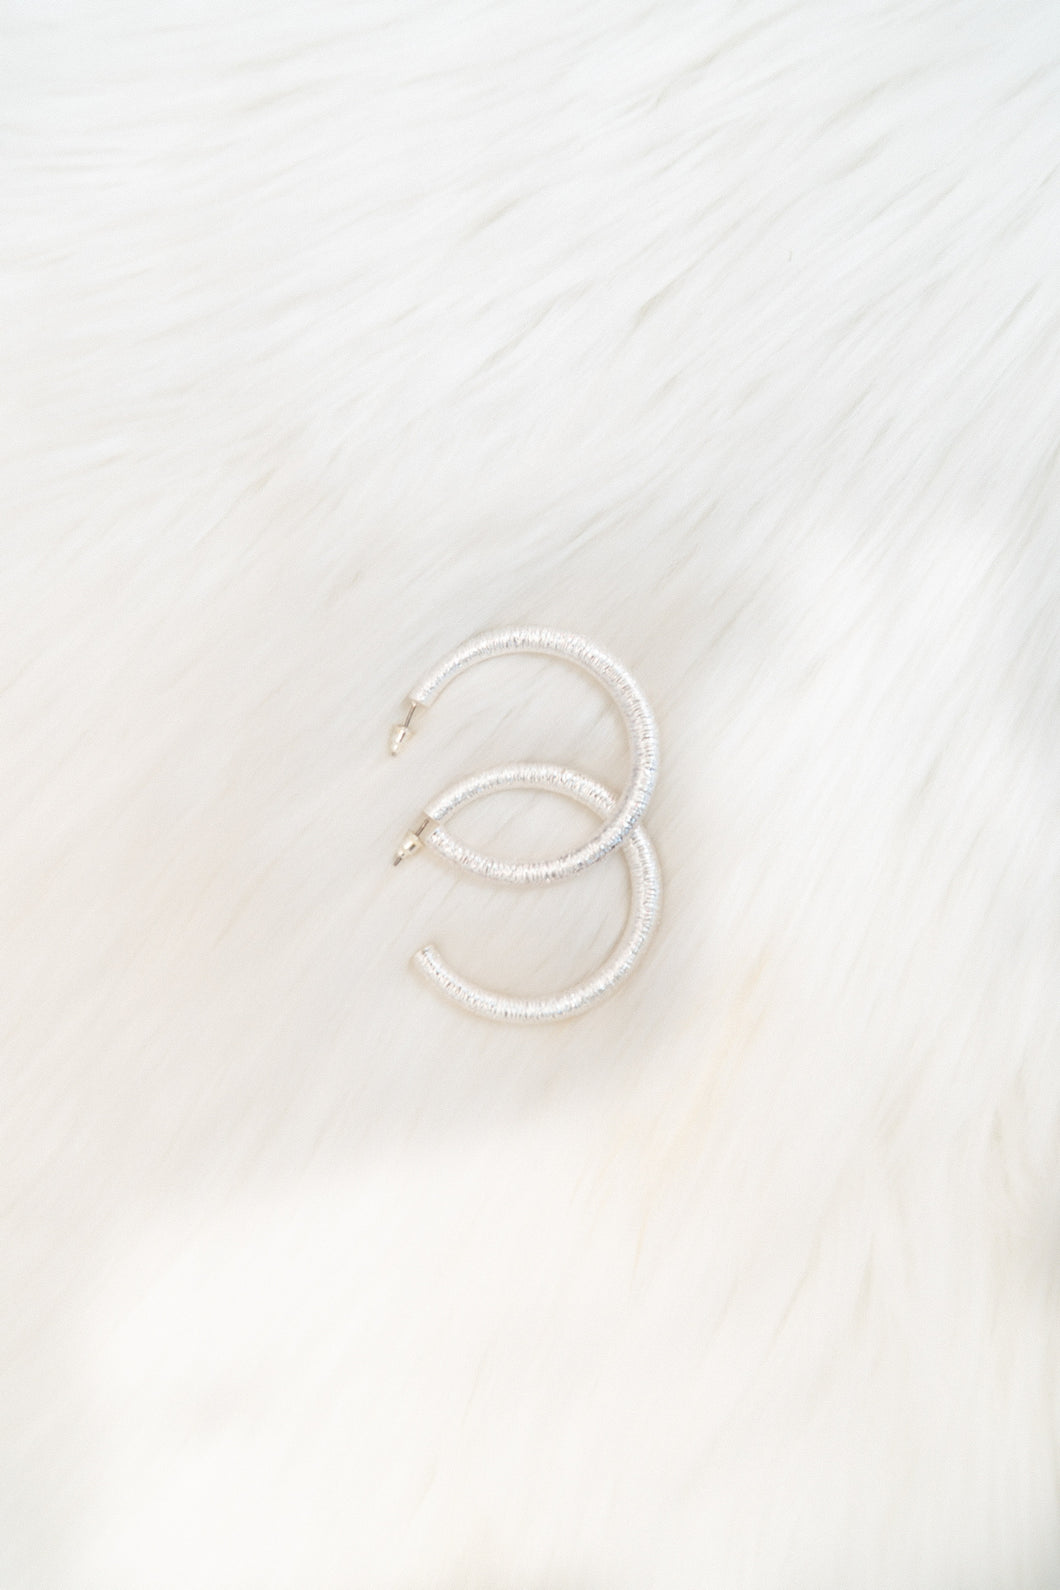 Talk About Textured Silver Hoops